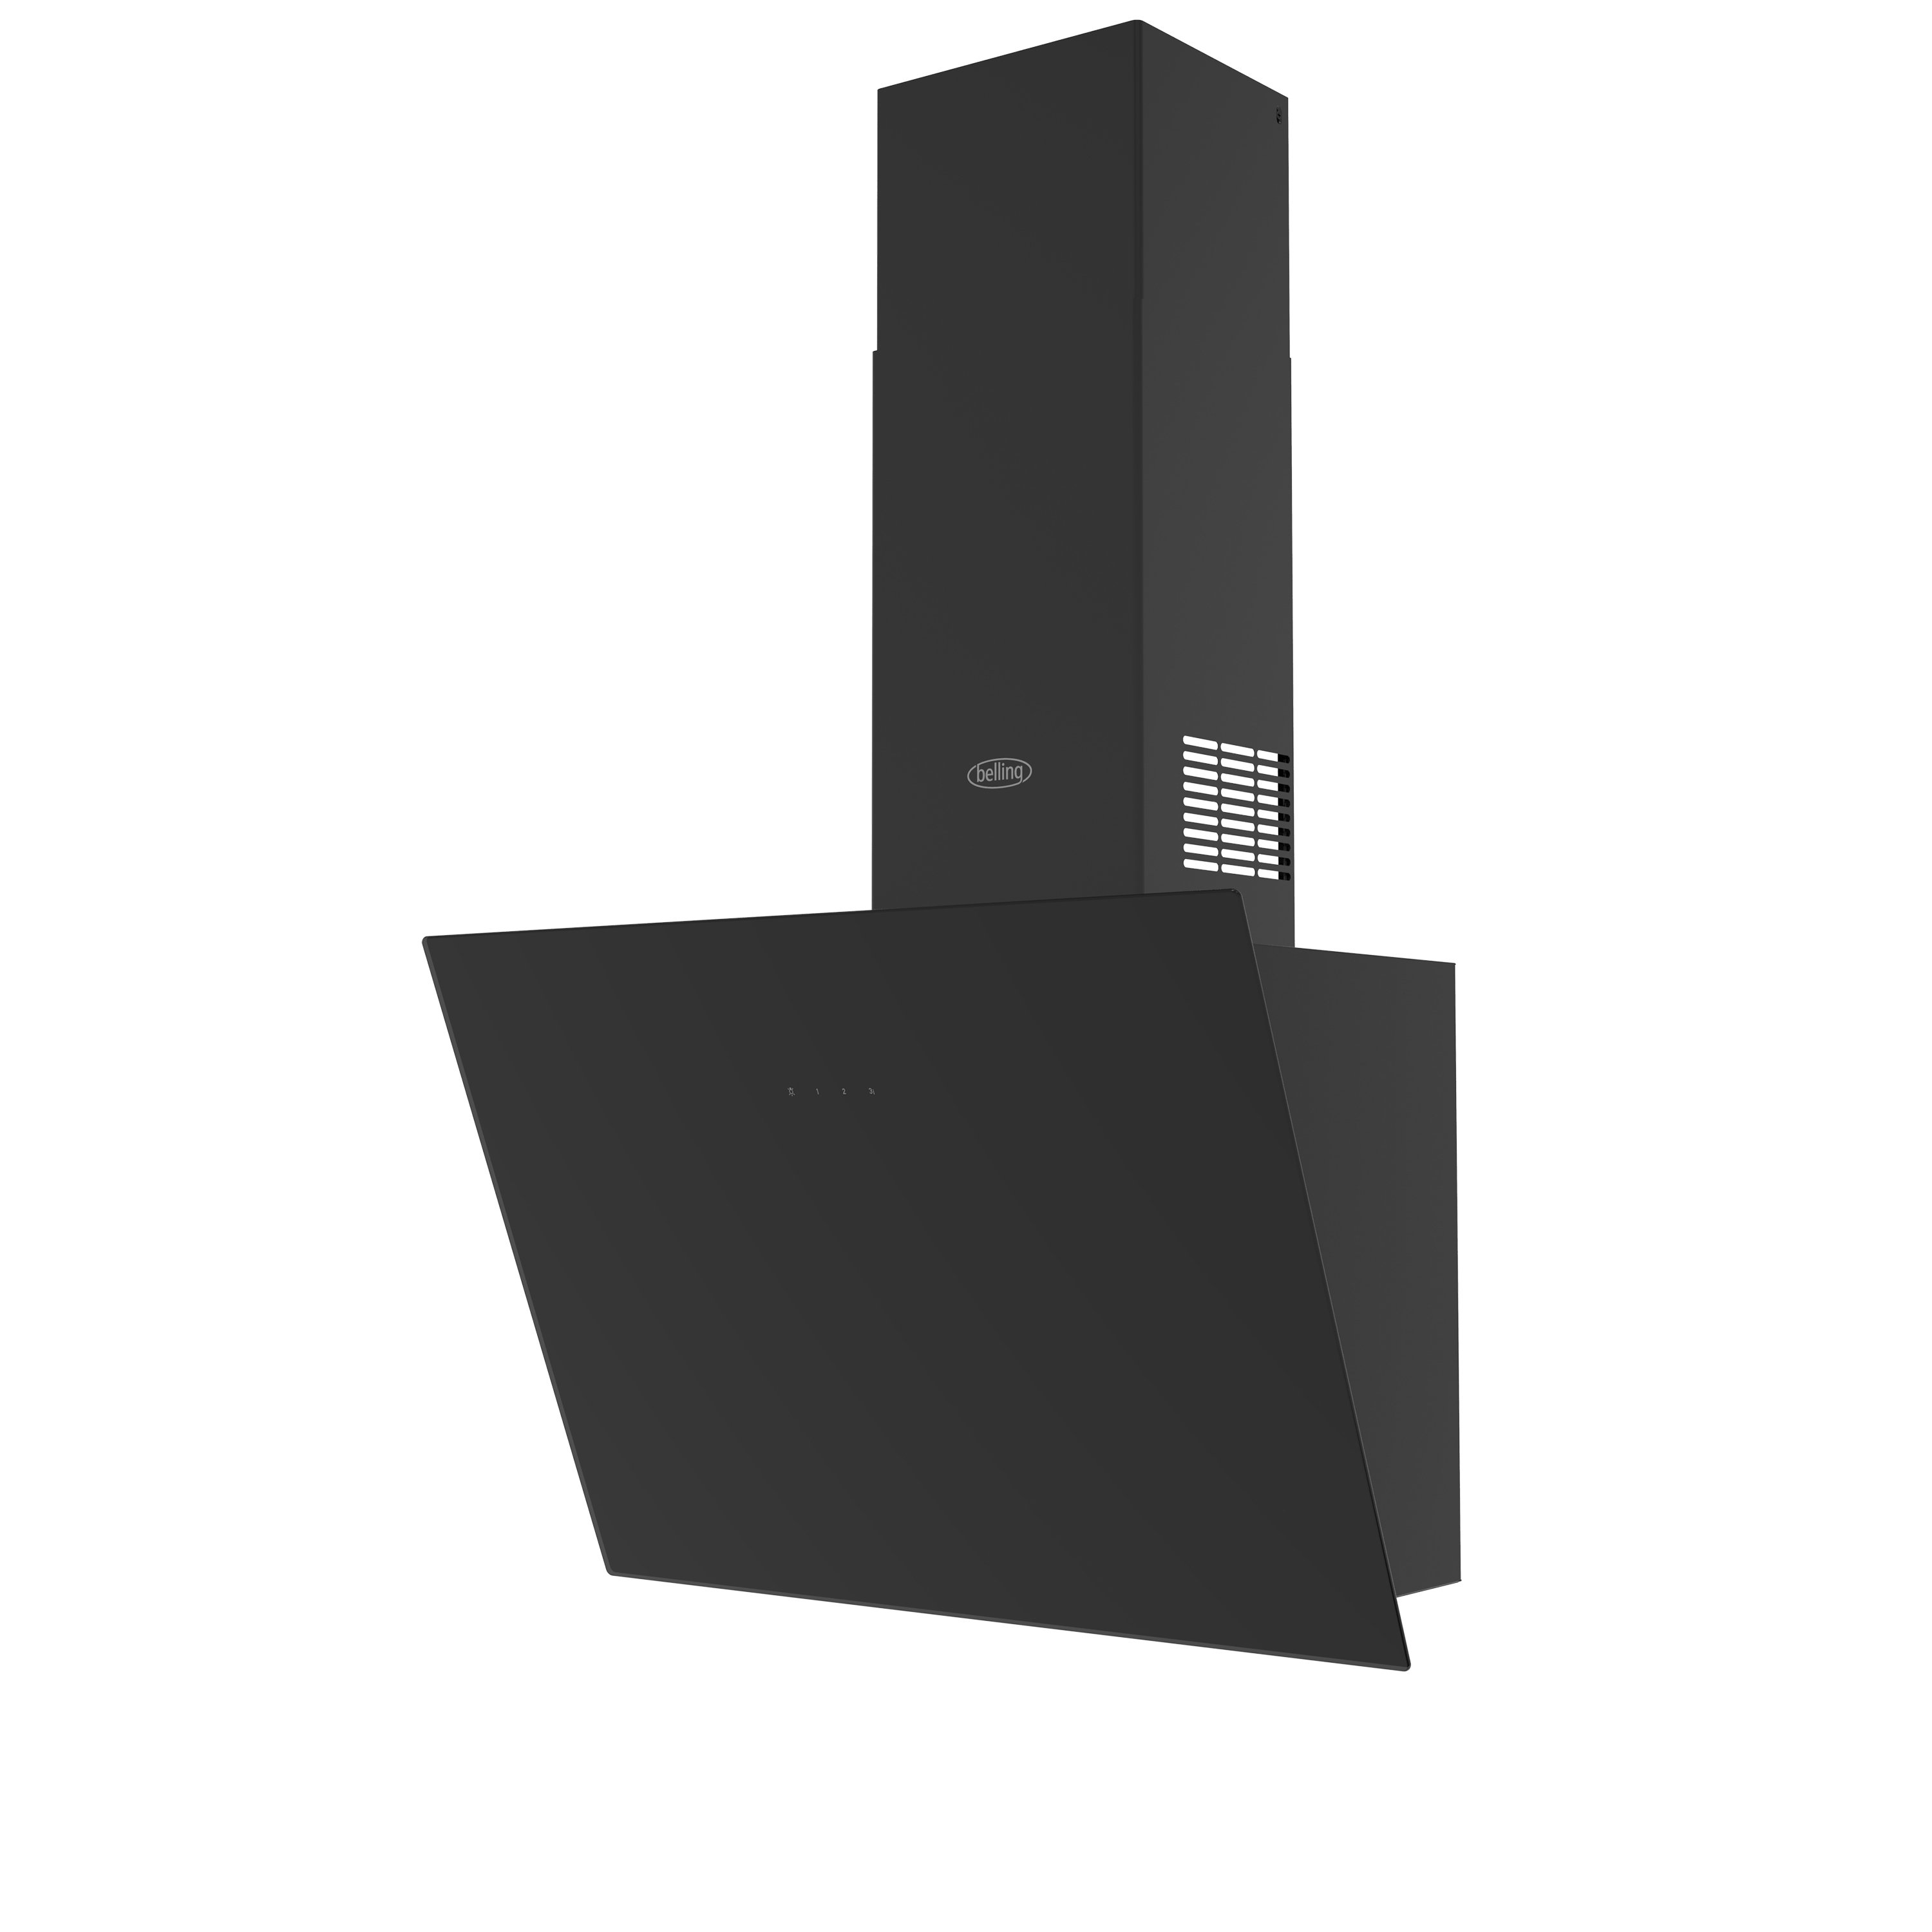 60cm Angled black glass hood with 3 fan speeds, boost mode, 2 LED lights, 2 washable grease filters and extendble chimney section